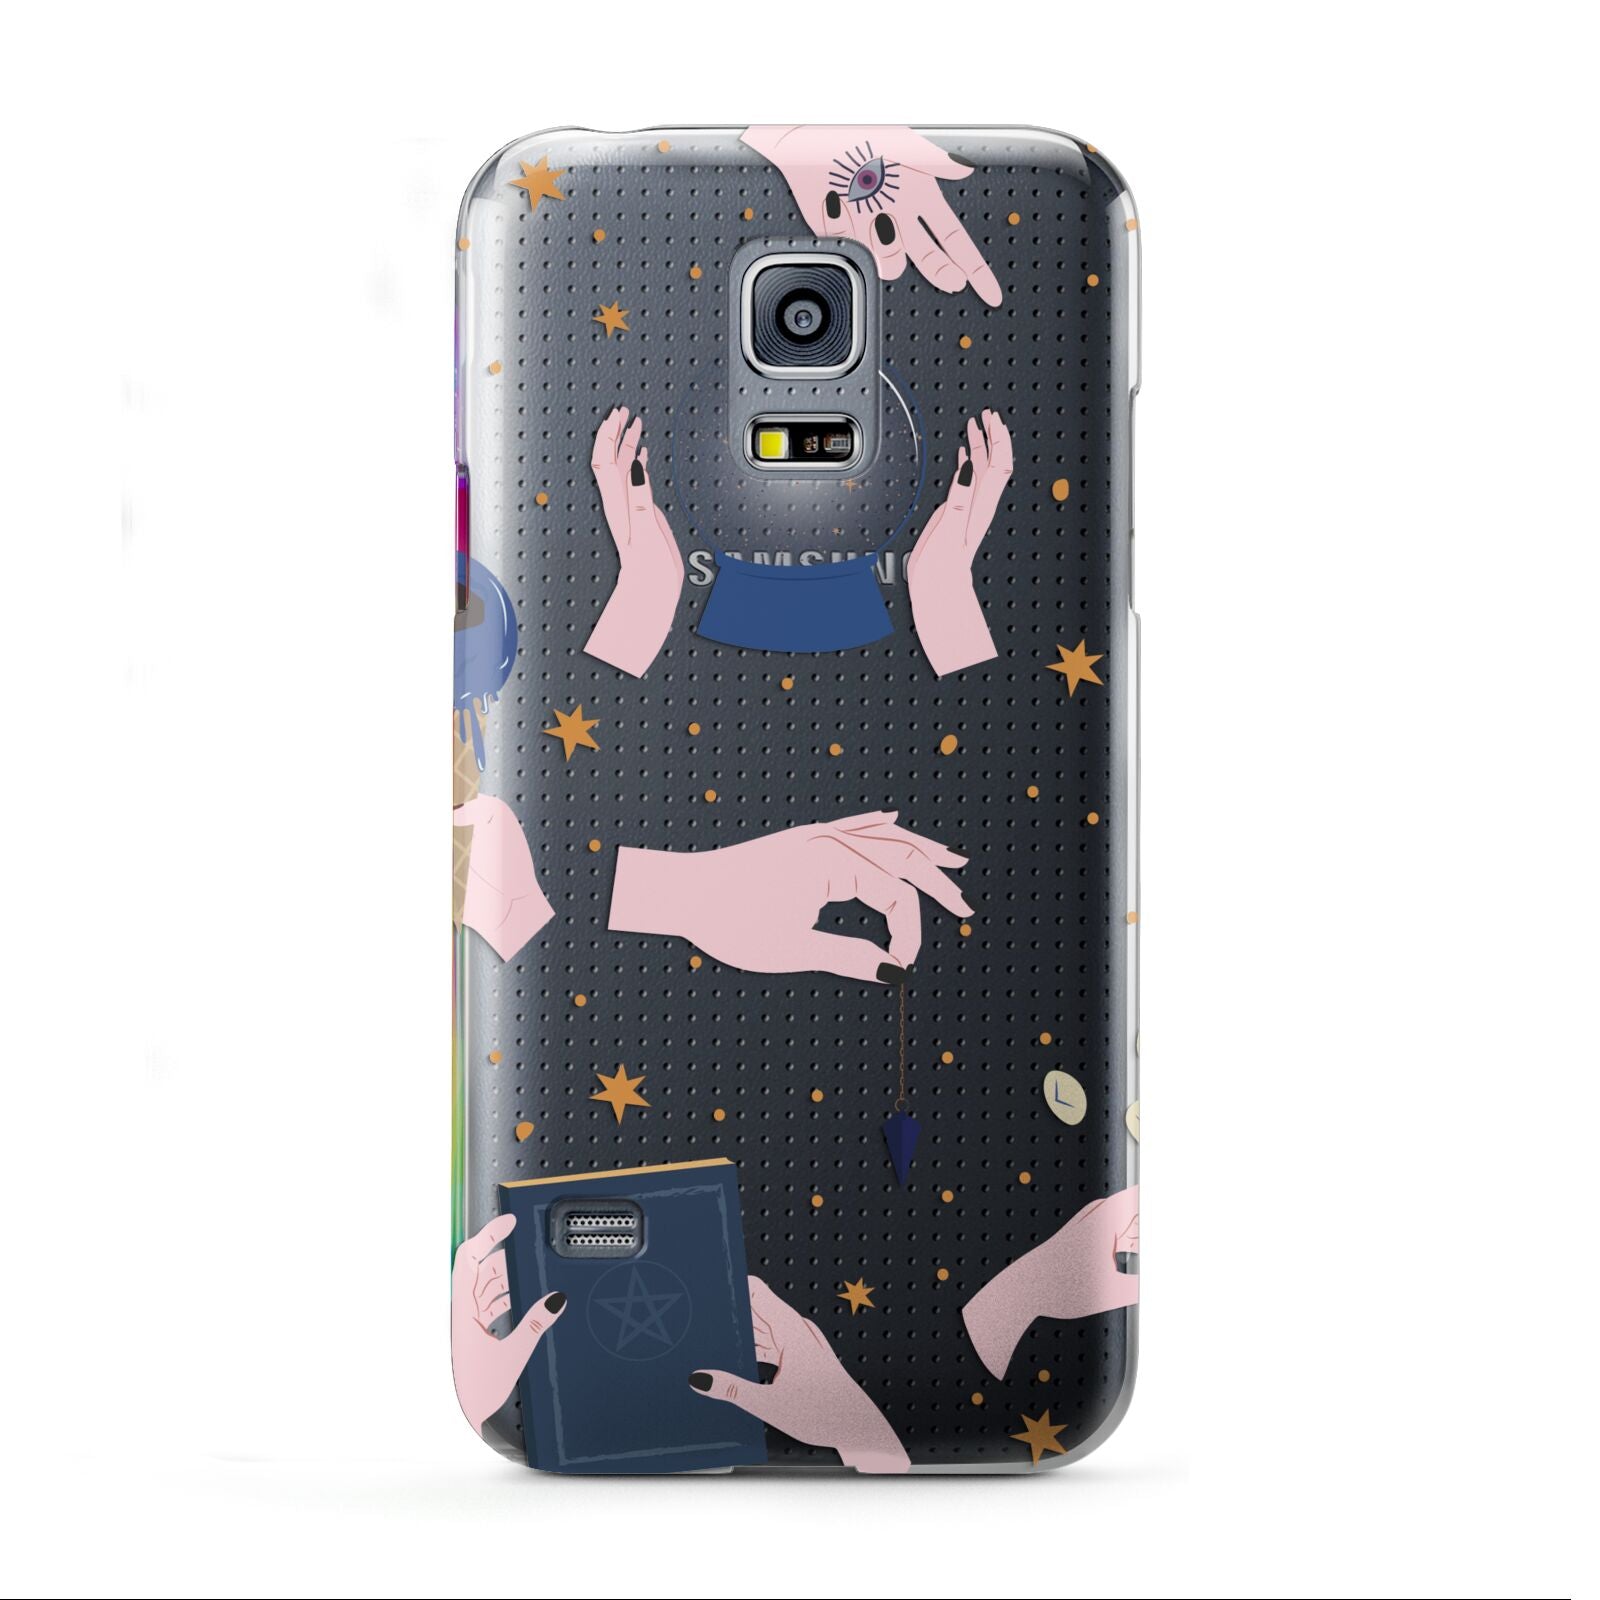 Clairvoyant Witches Hands Samsung Galaxy S5 Mini Case